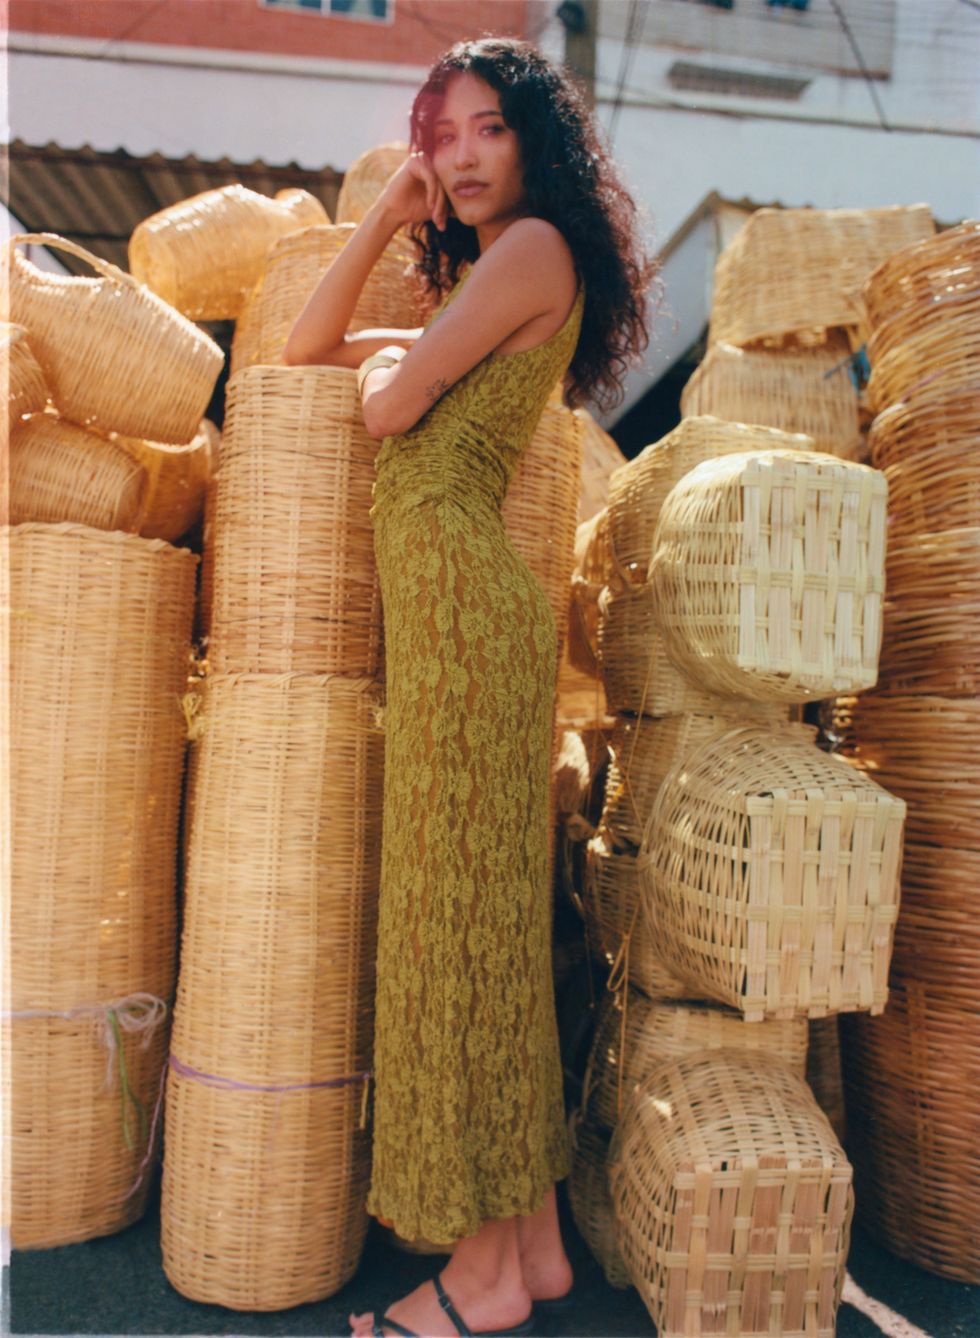 a person in a dress standing next to baskets of bread